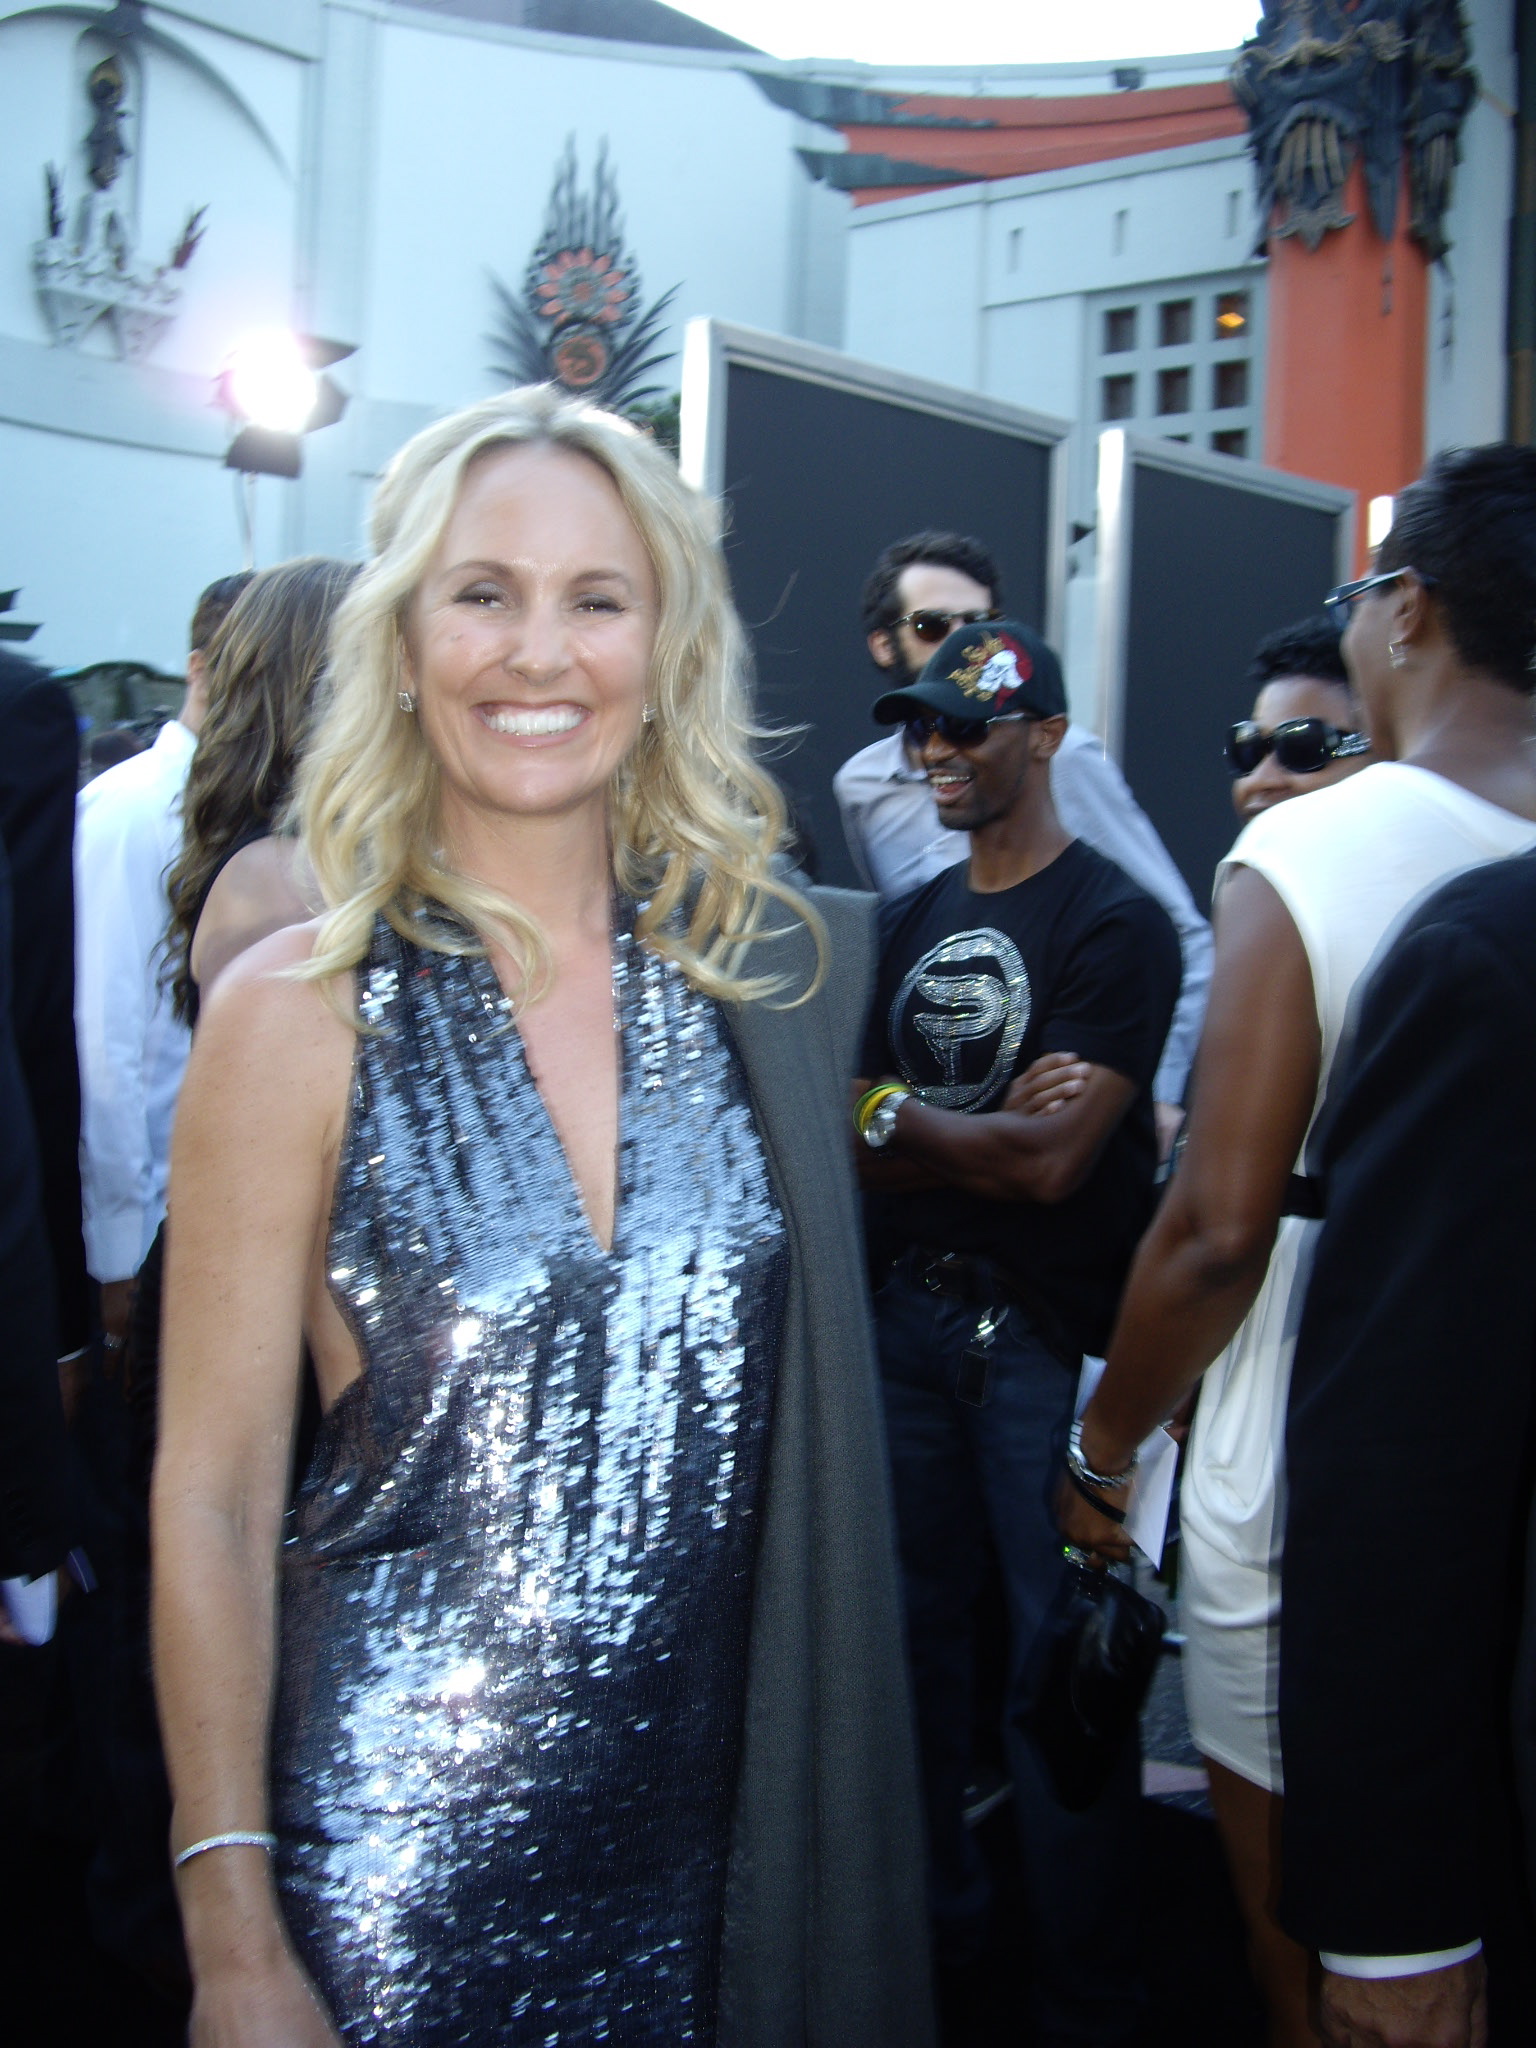 Gina Greblo at the premiere of The Expendables